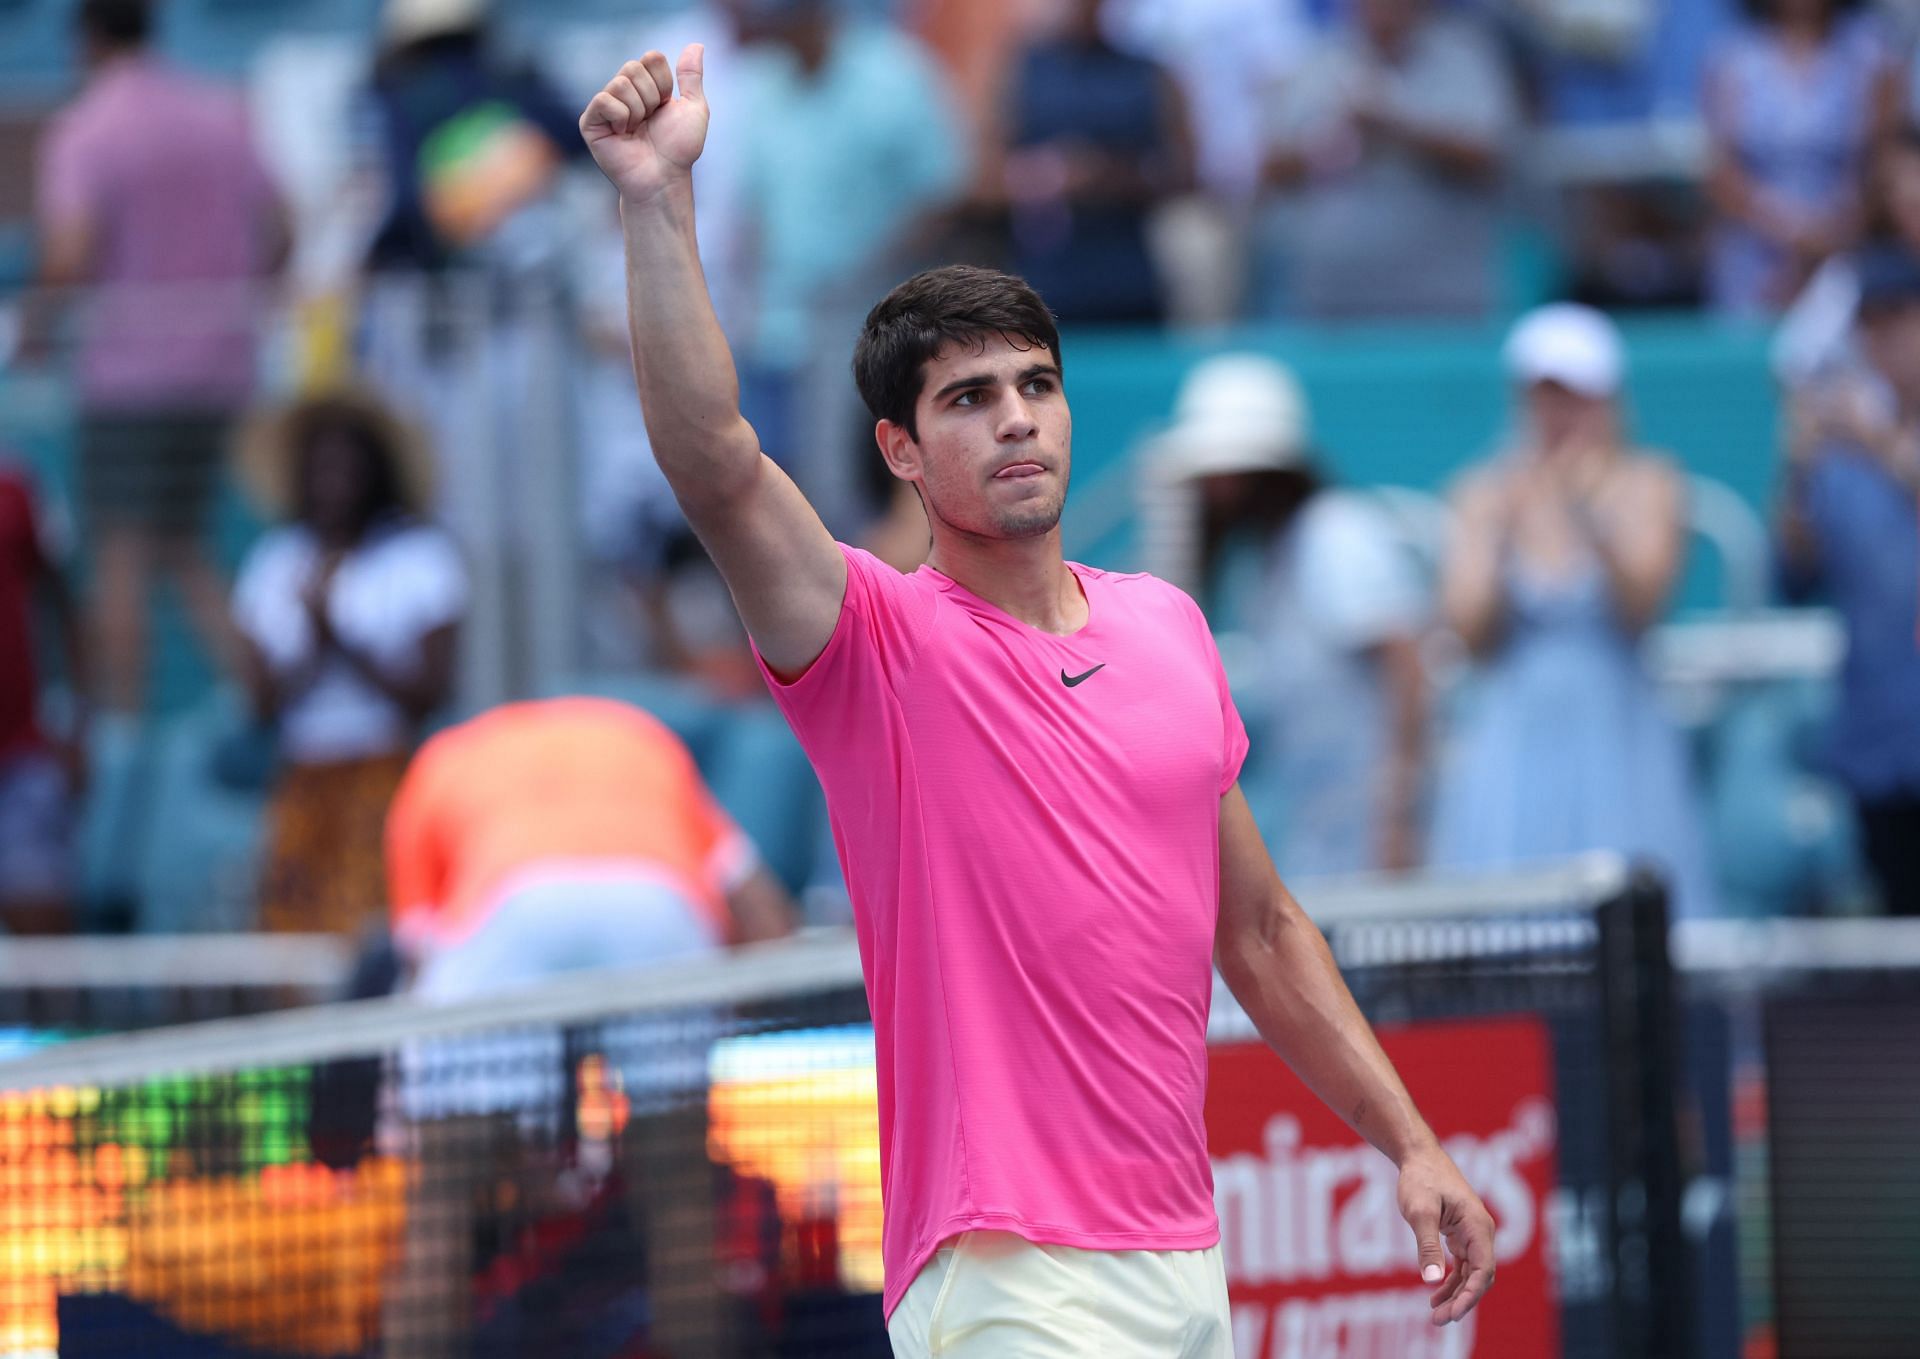 Miami Open 2023 Schedule Today TV schedule, start time, order of play